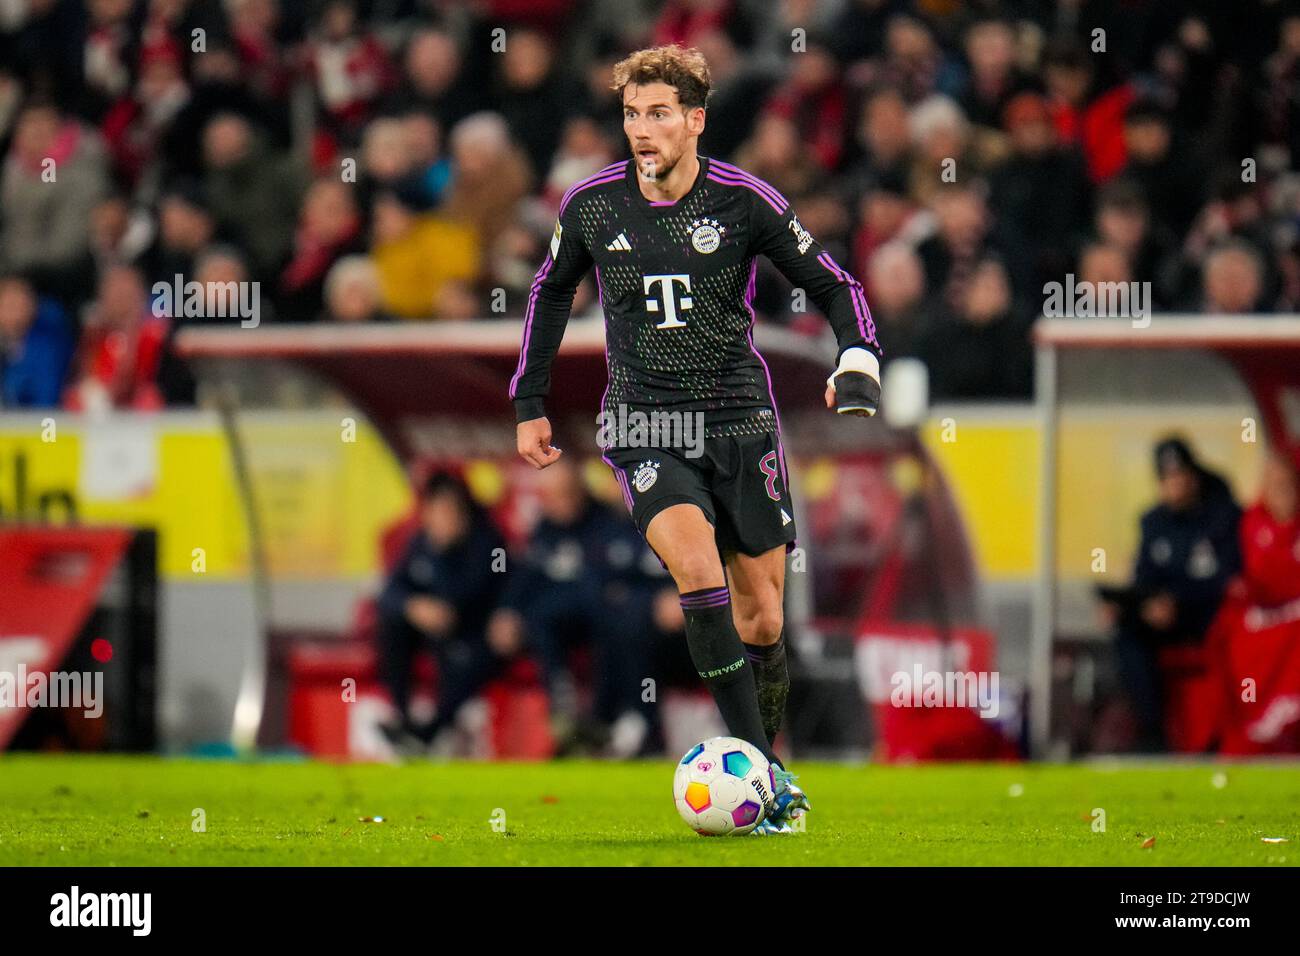 Cologne, Germany. 24th Nov, 2023. COLOGNE, GERMANY - NOVEMBER 24: Leon Goretzka of FC Bayern Munchen dribbles with the ball during the Bundesliga match between 1. FC Koln and FC Bayern Munchen at the RheinEnergieStadion on November 24, 2023 in Cologne, Germany. (Photo by Rene Nijhuis/BSR Agency) Credit: BSR Agency/Alamy Live News Stock Photo